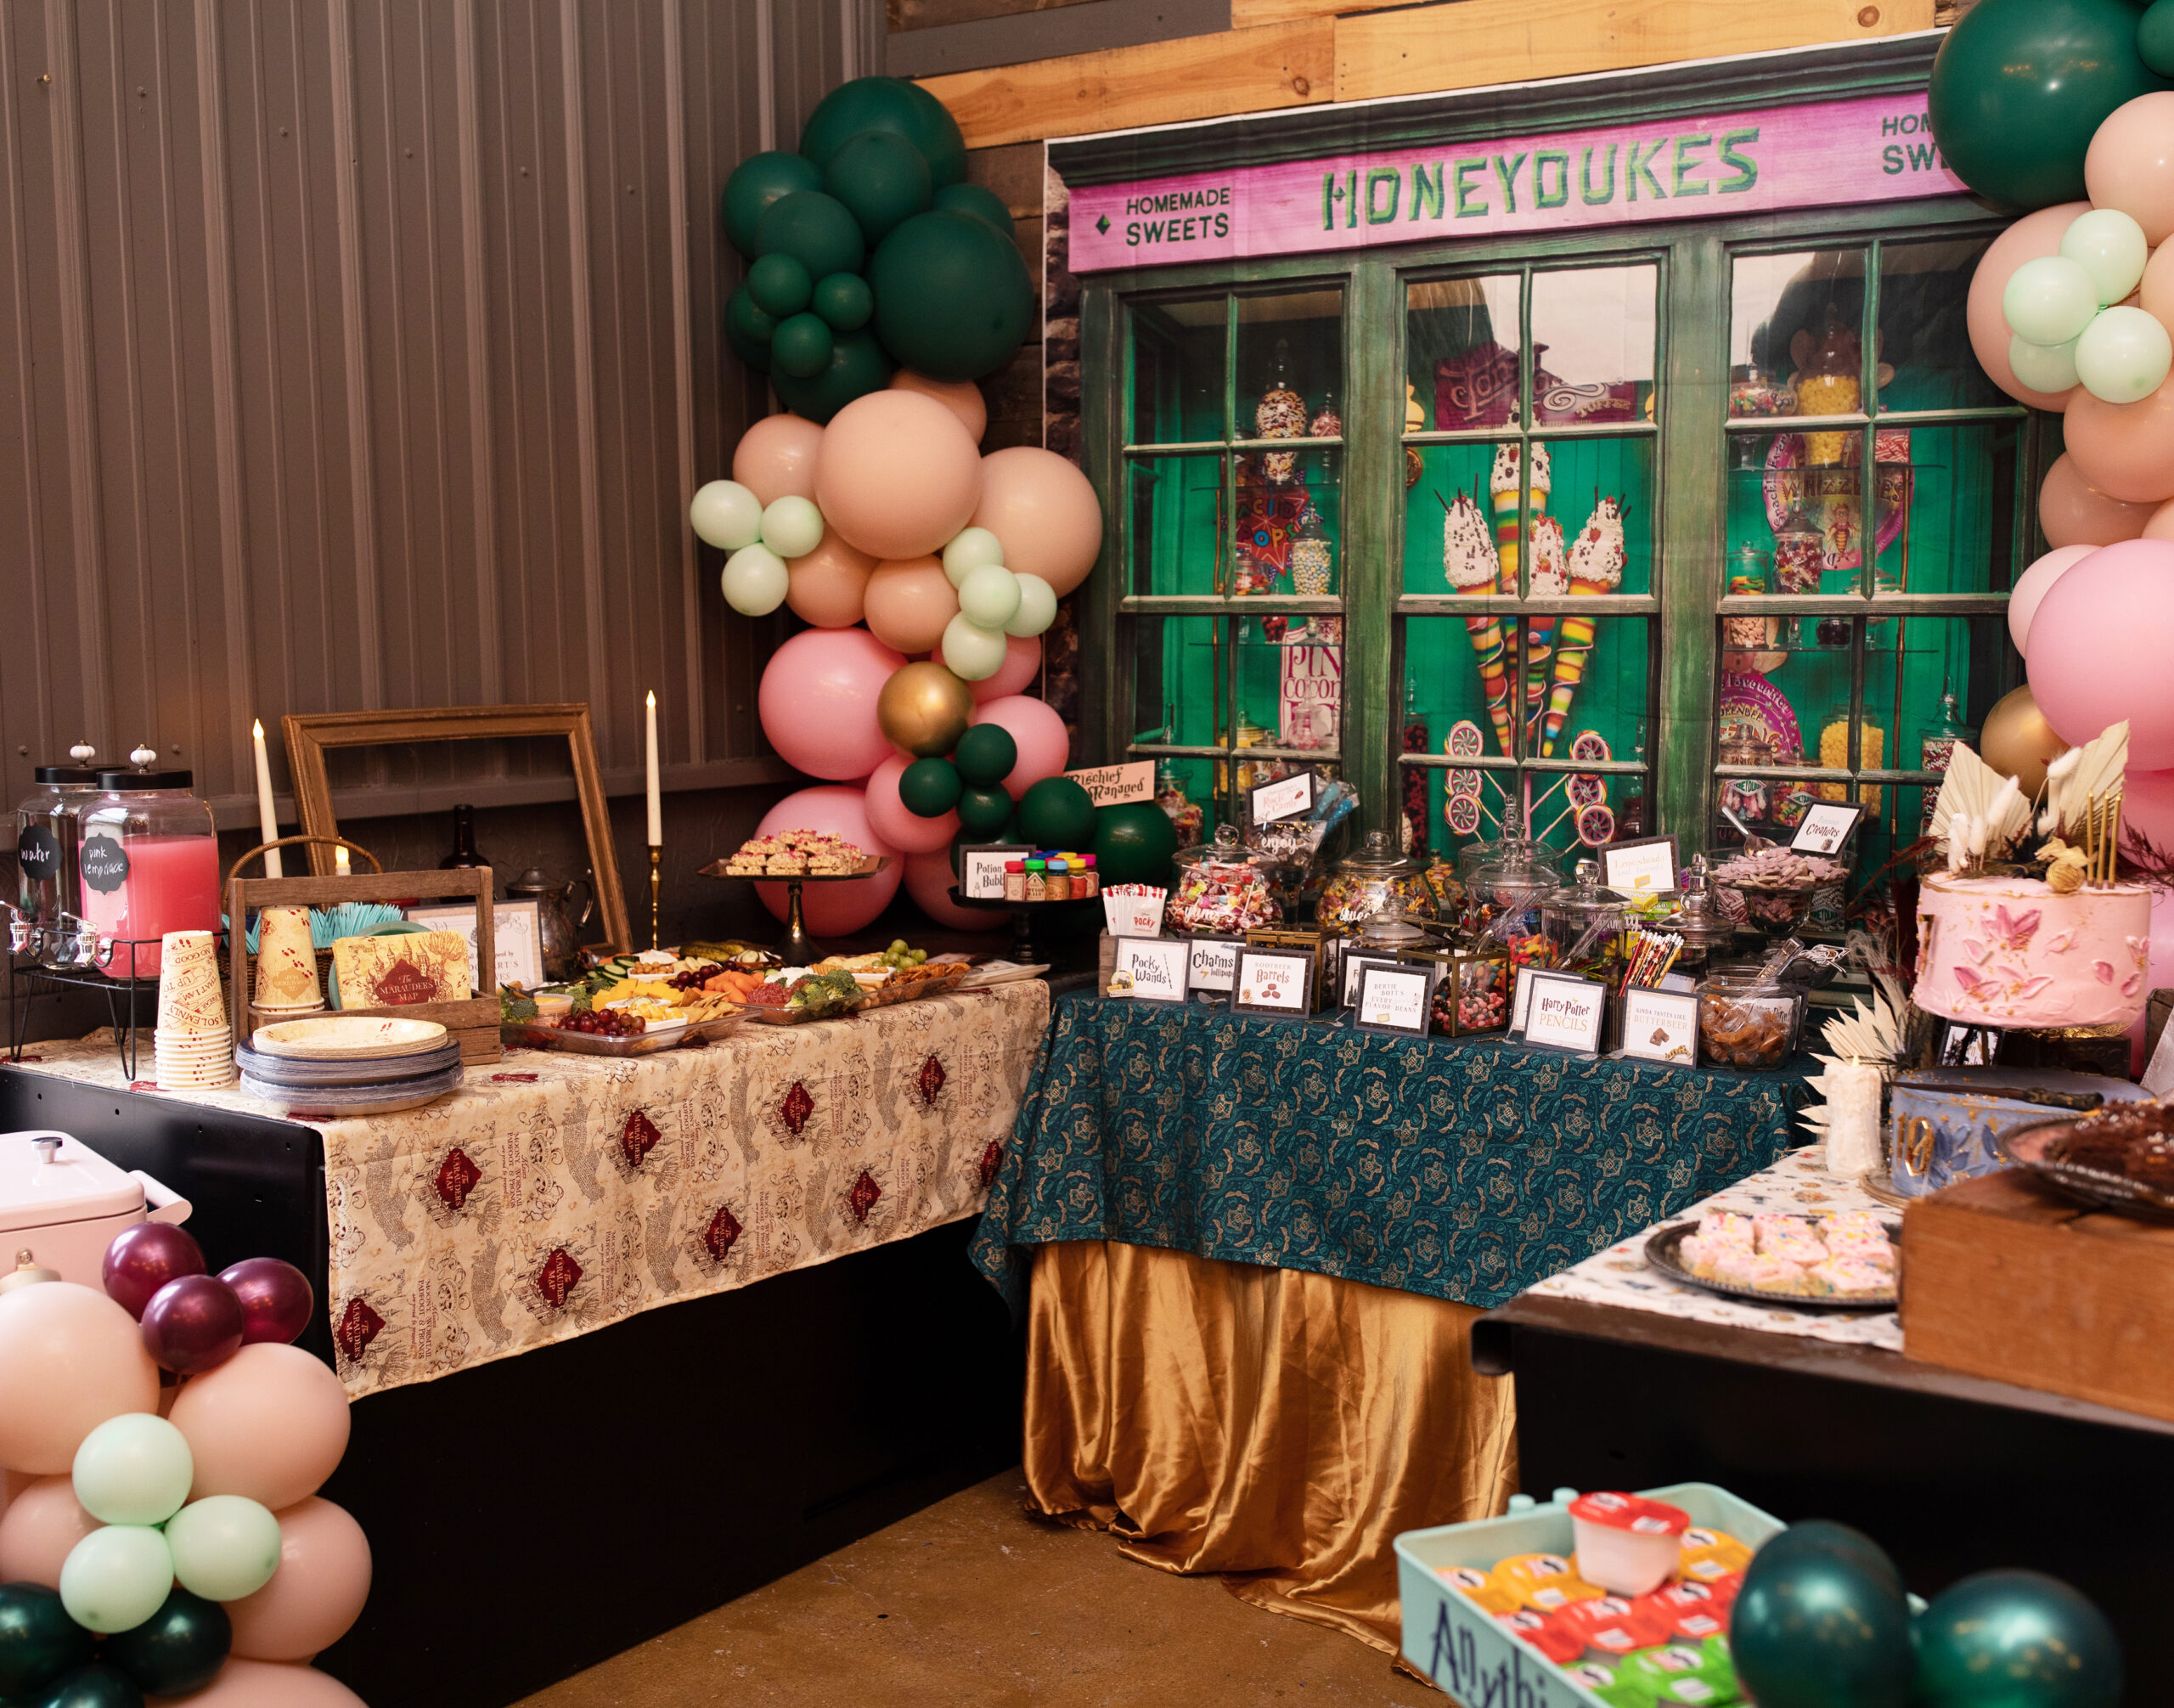 Harry Potter Birthday Party Ideas – Part 1 // Hostess with the Mostess®